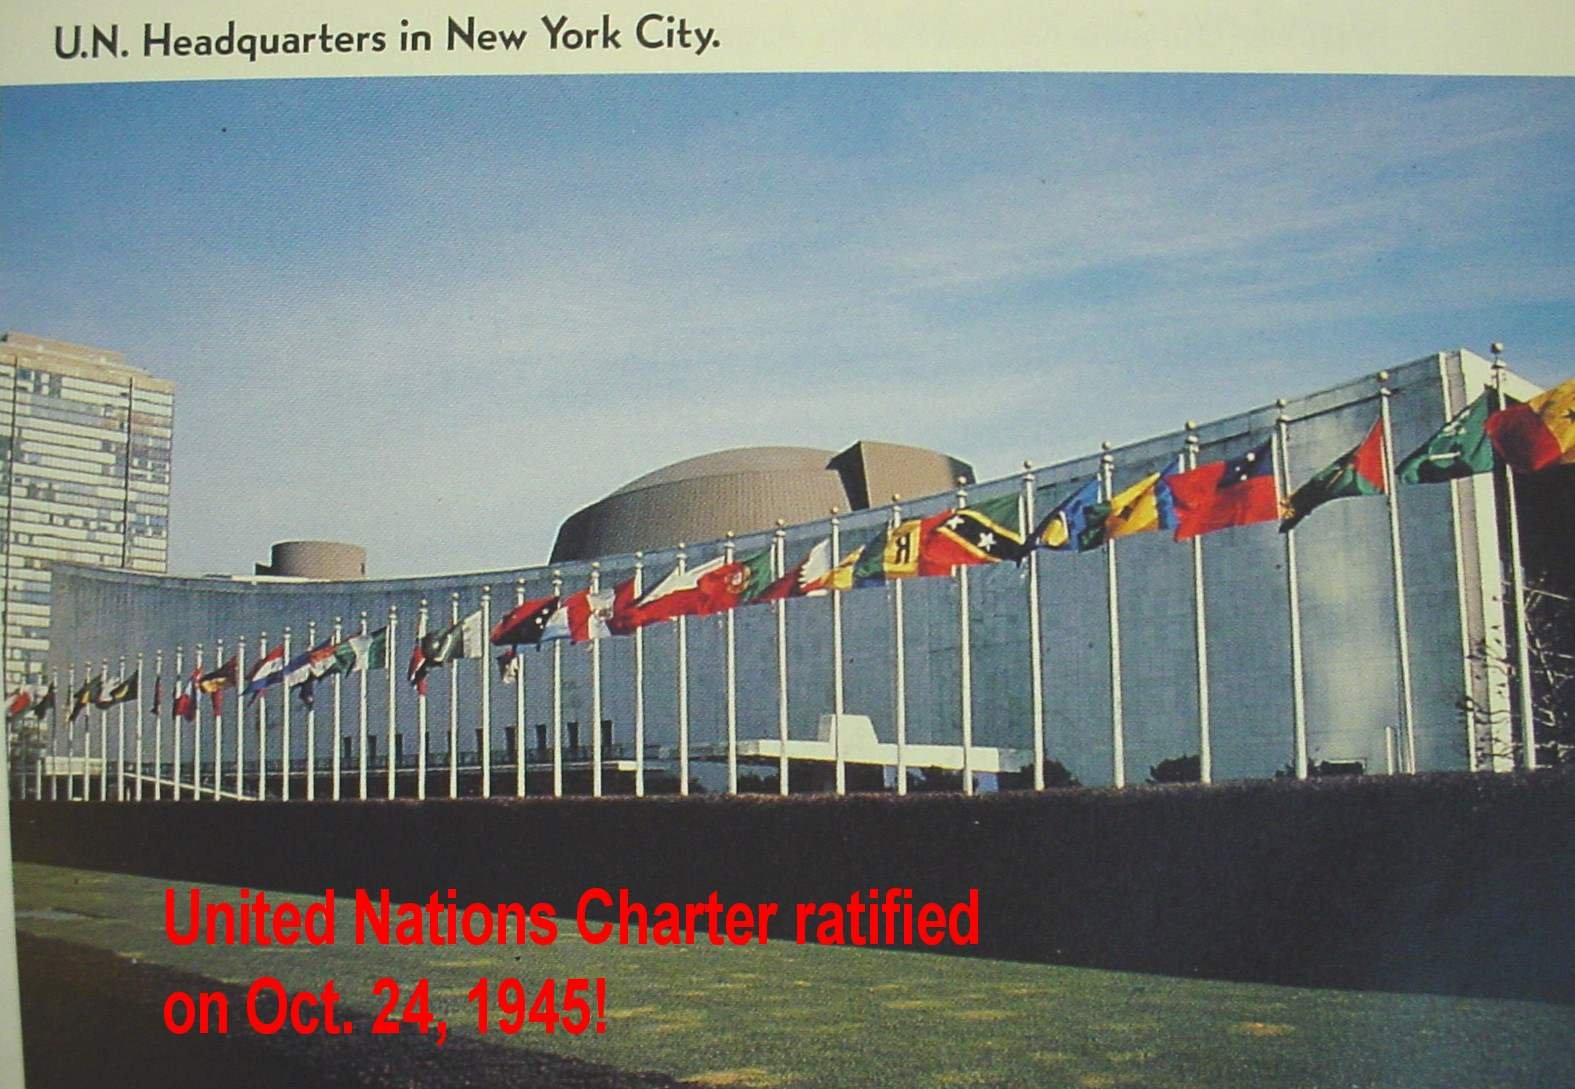 The United Nations building with flags of the nations in New York City